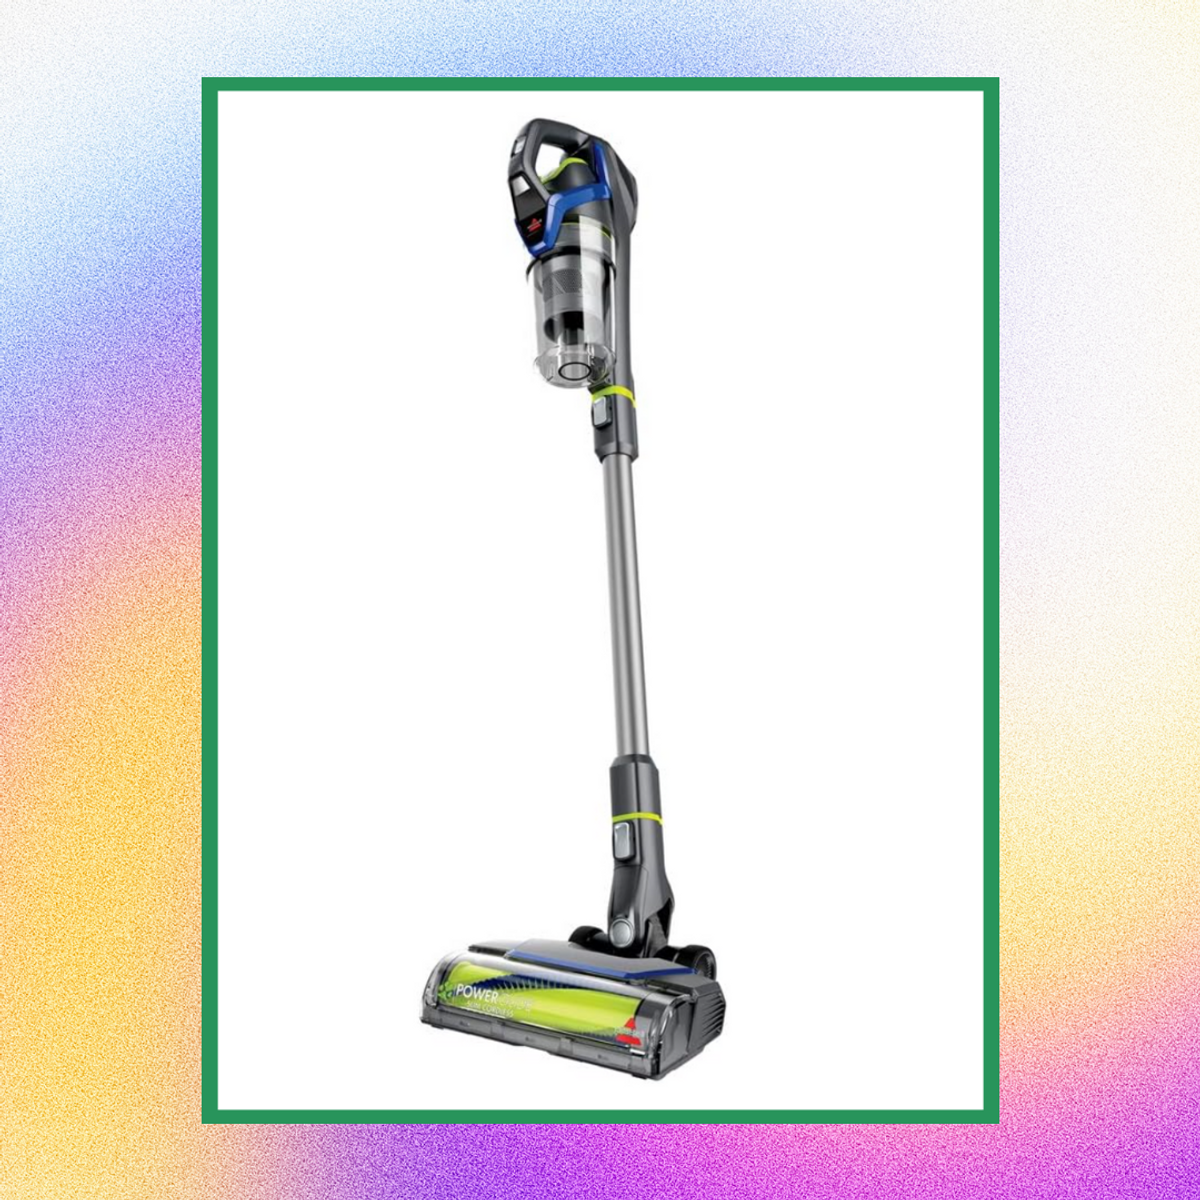 prime day vacuum deals on this bissell pet hair stick cordless vacuum